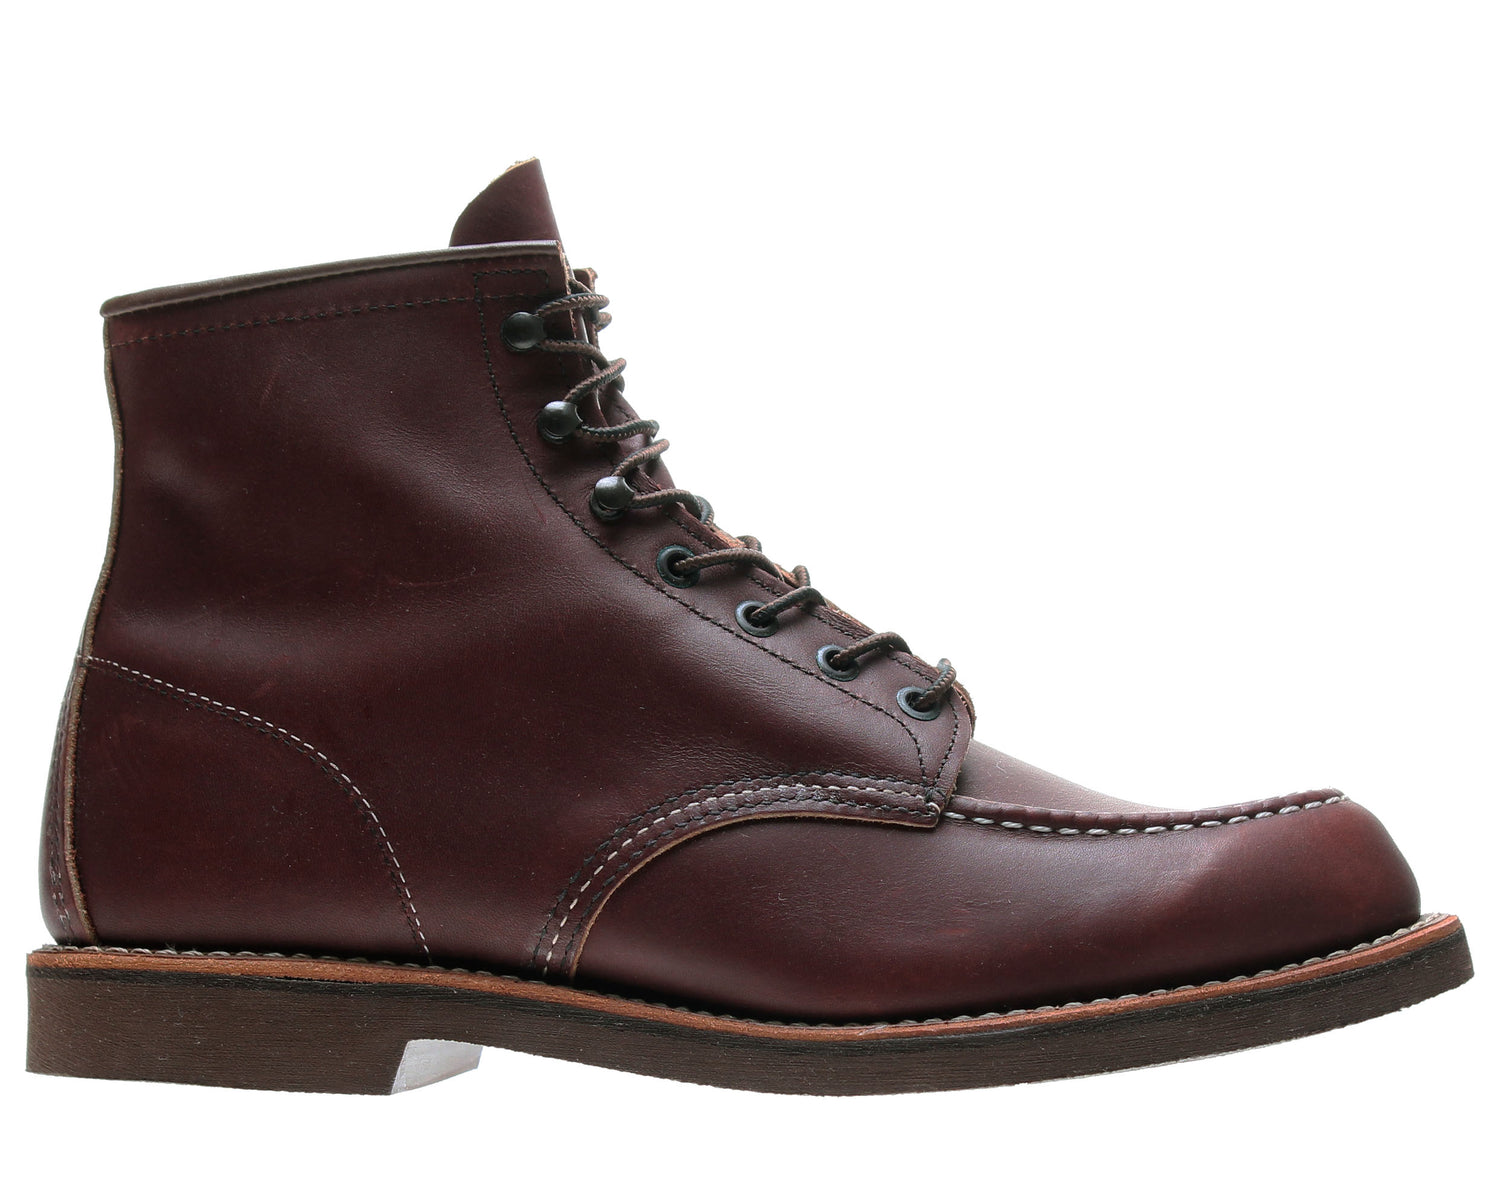 Red Wing Heritage 213 6-Inch Moc Toe Oxblood Men's Boots